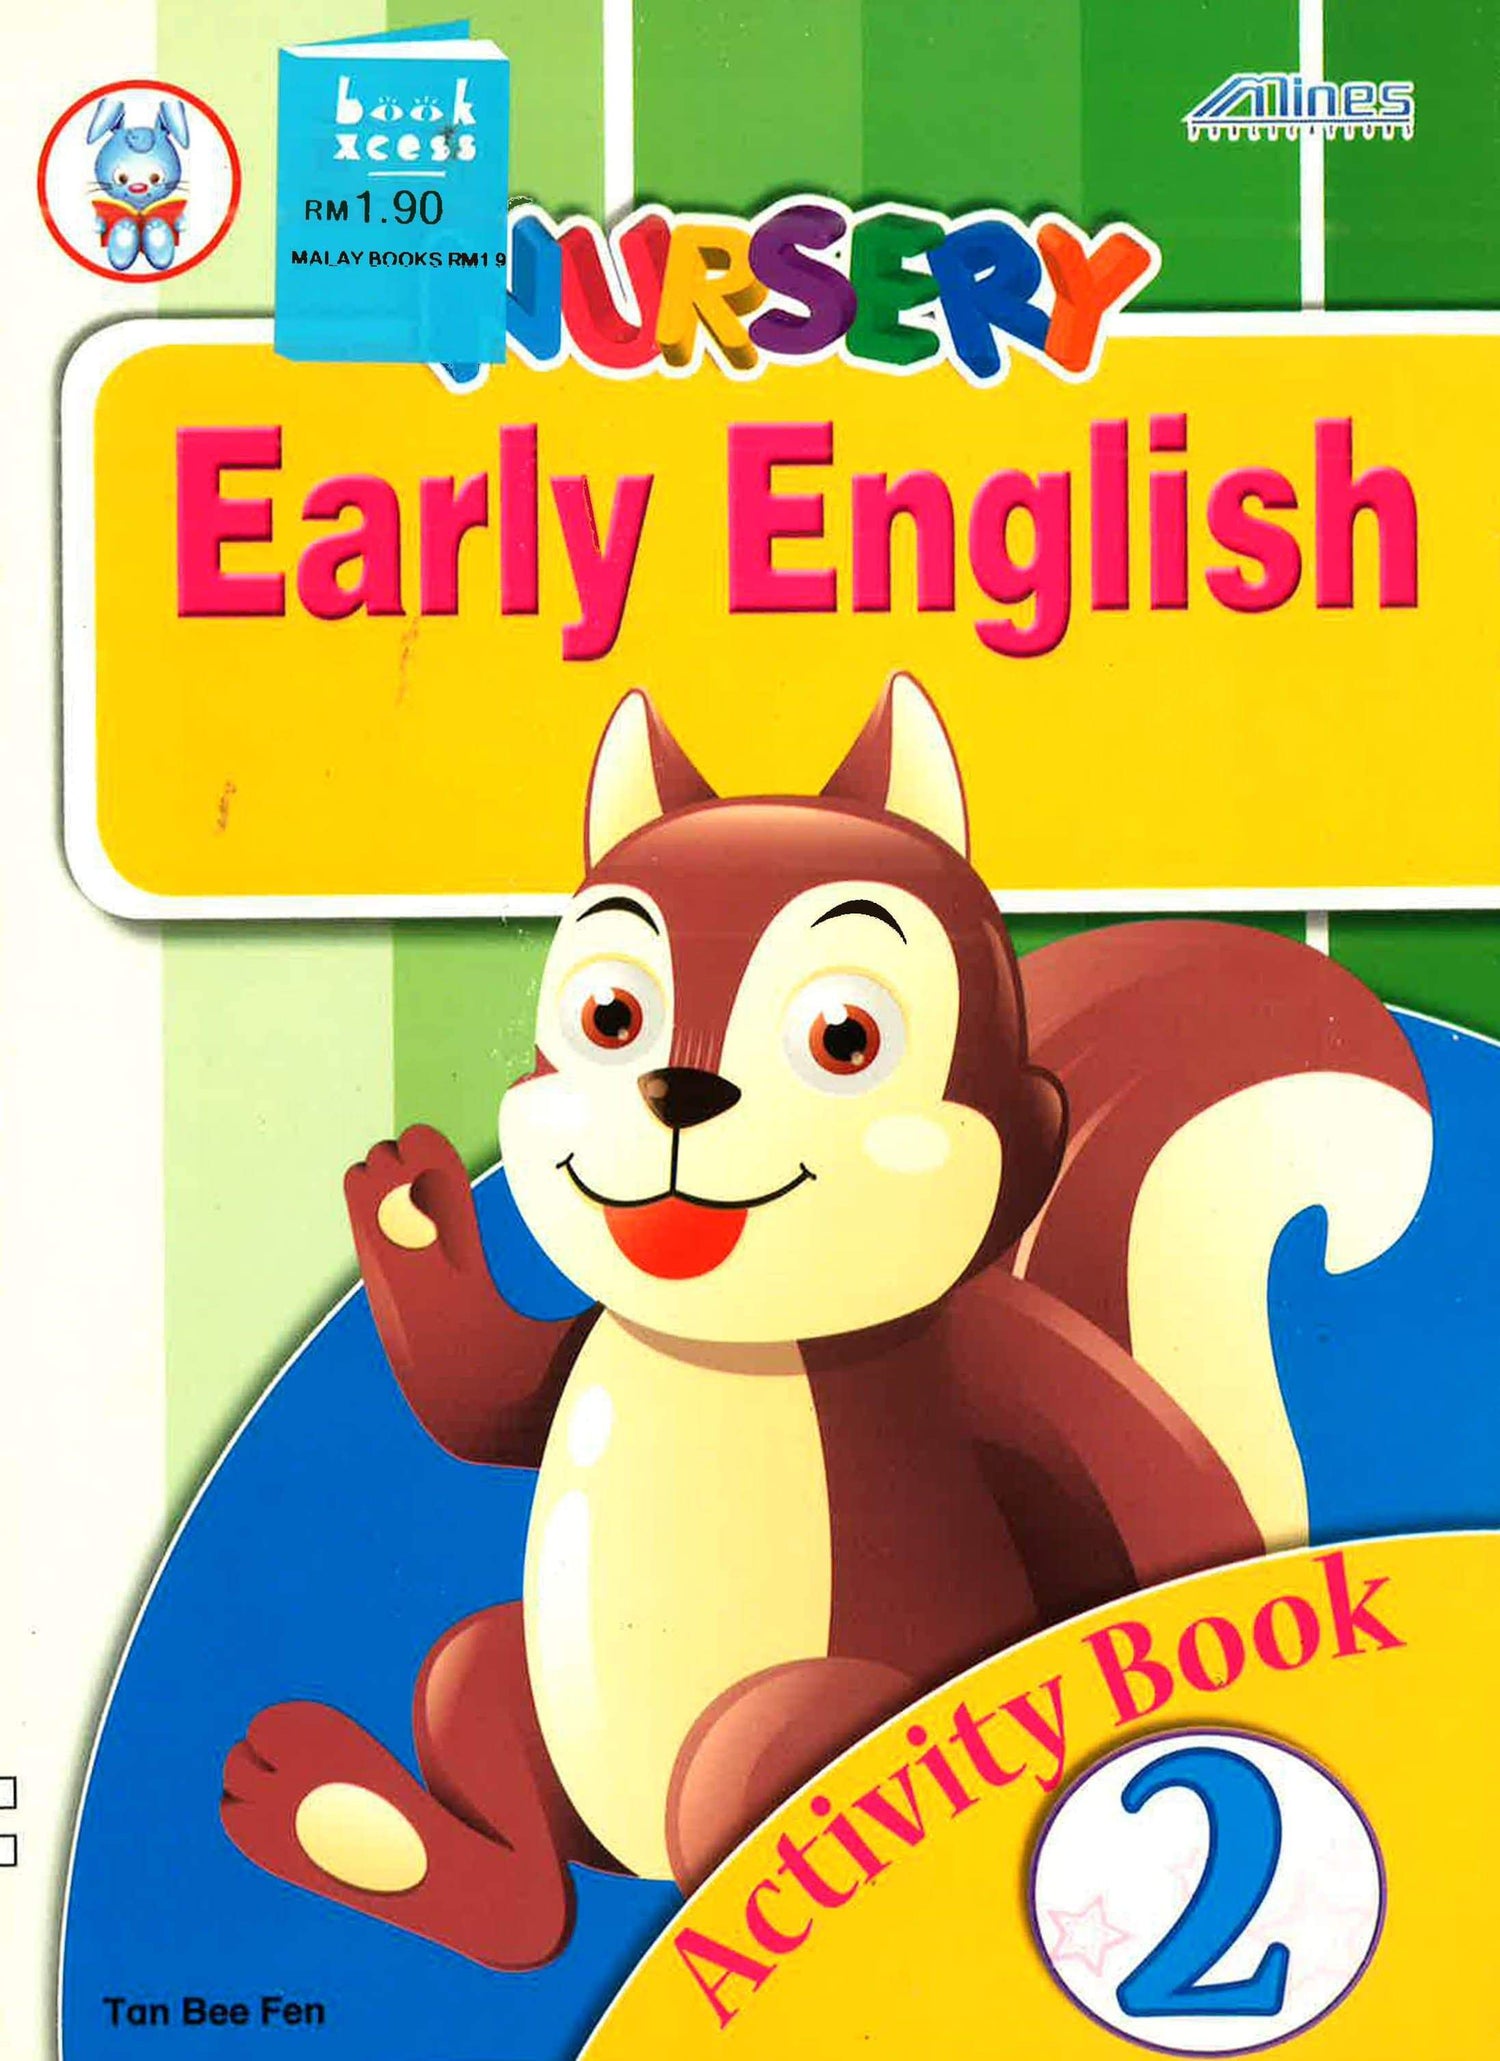 Nusery Early English Activity Book 2